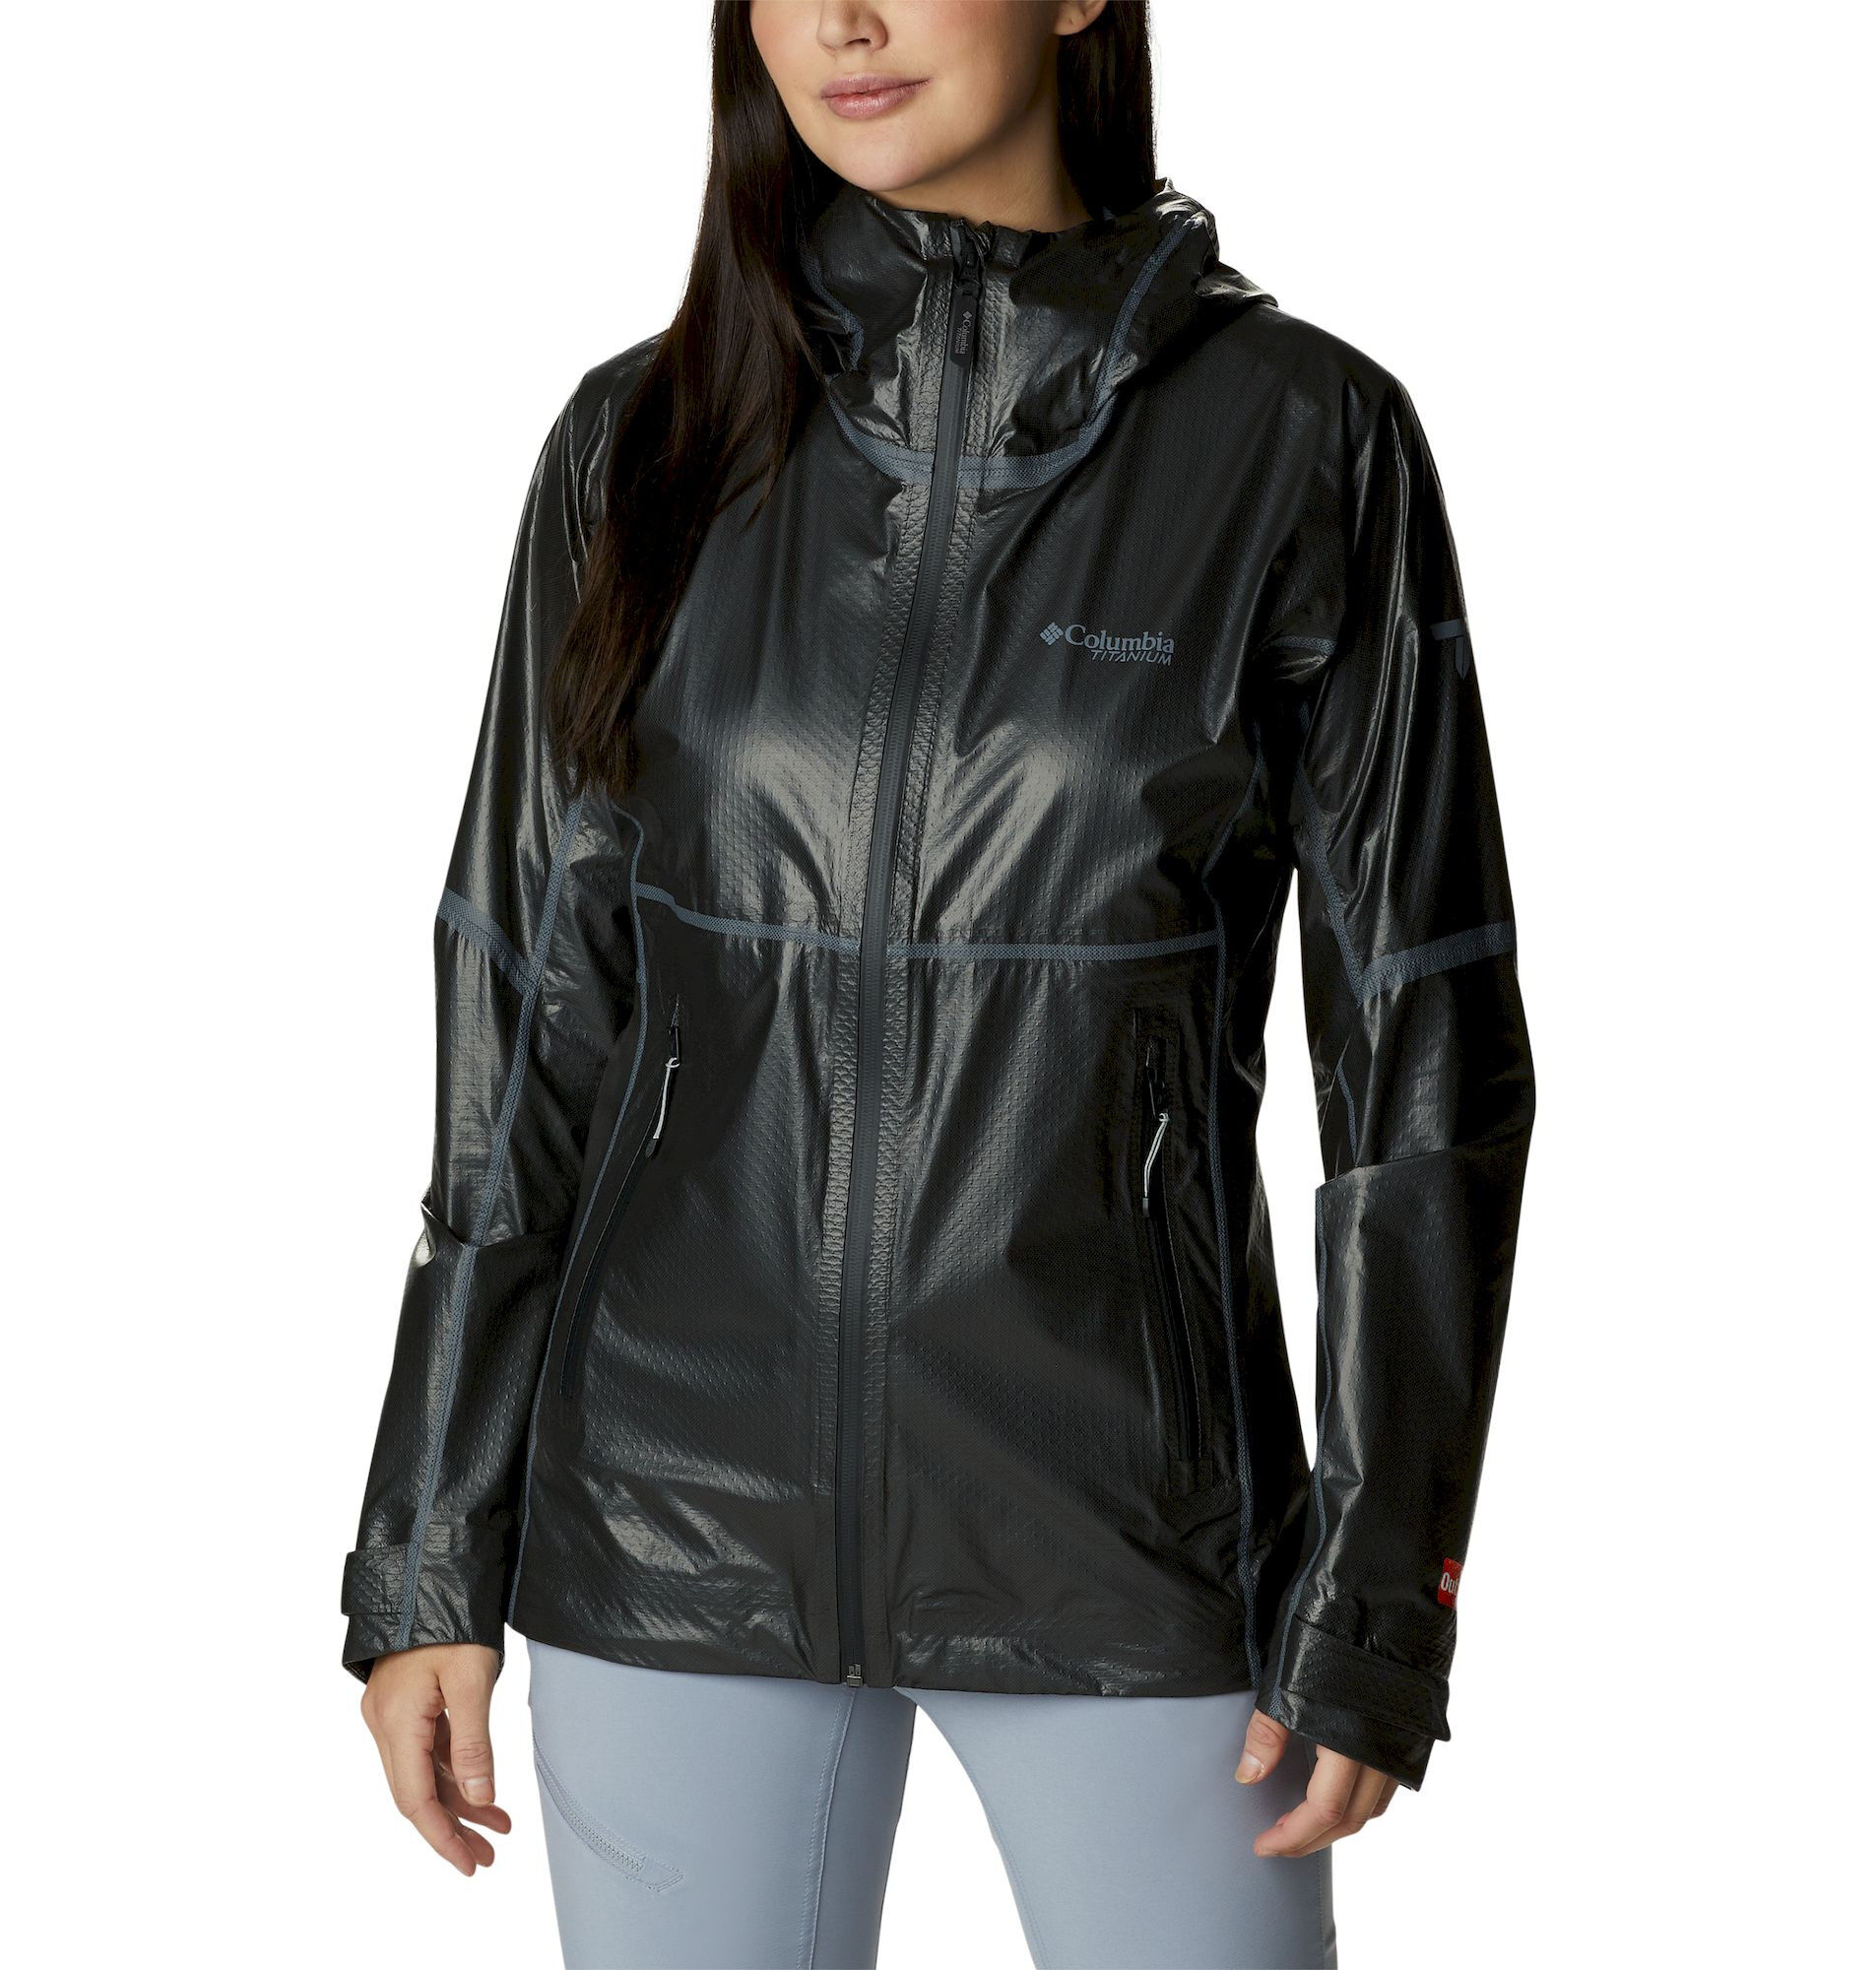 Columbia Outdry Extreme™ Mesh Shell™ - Waterproof jacket - Women's